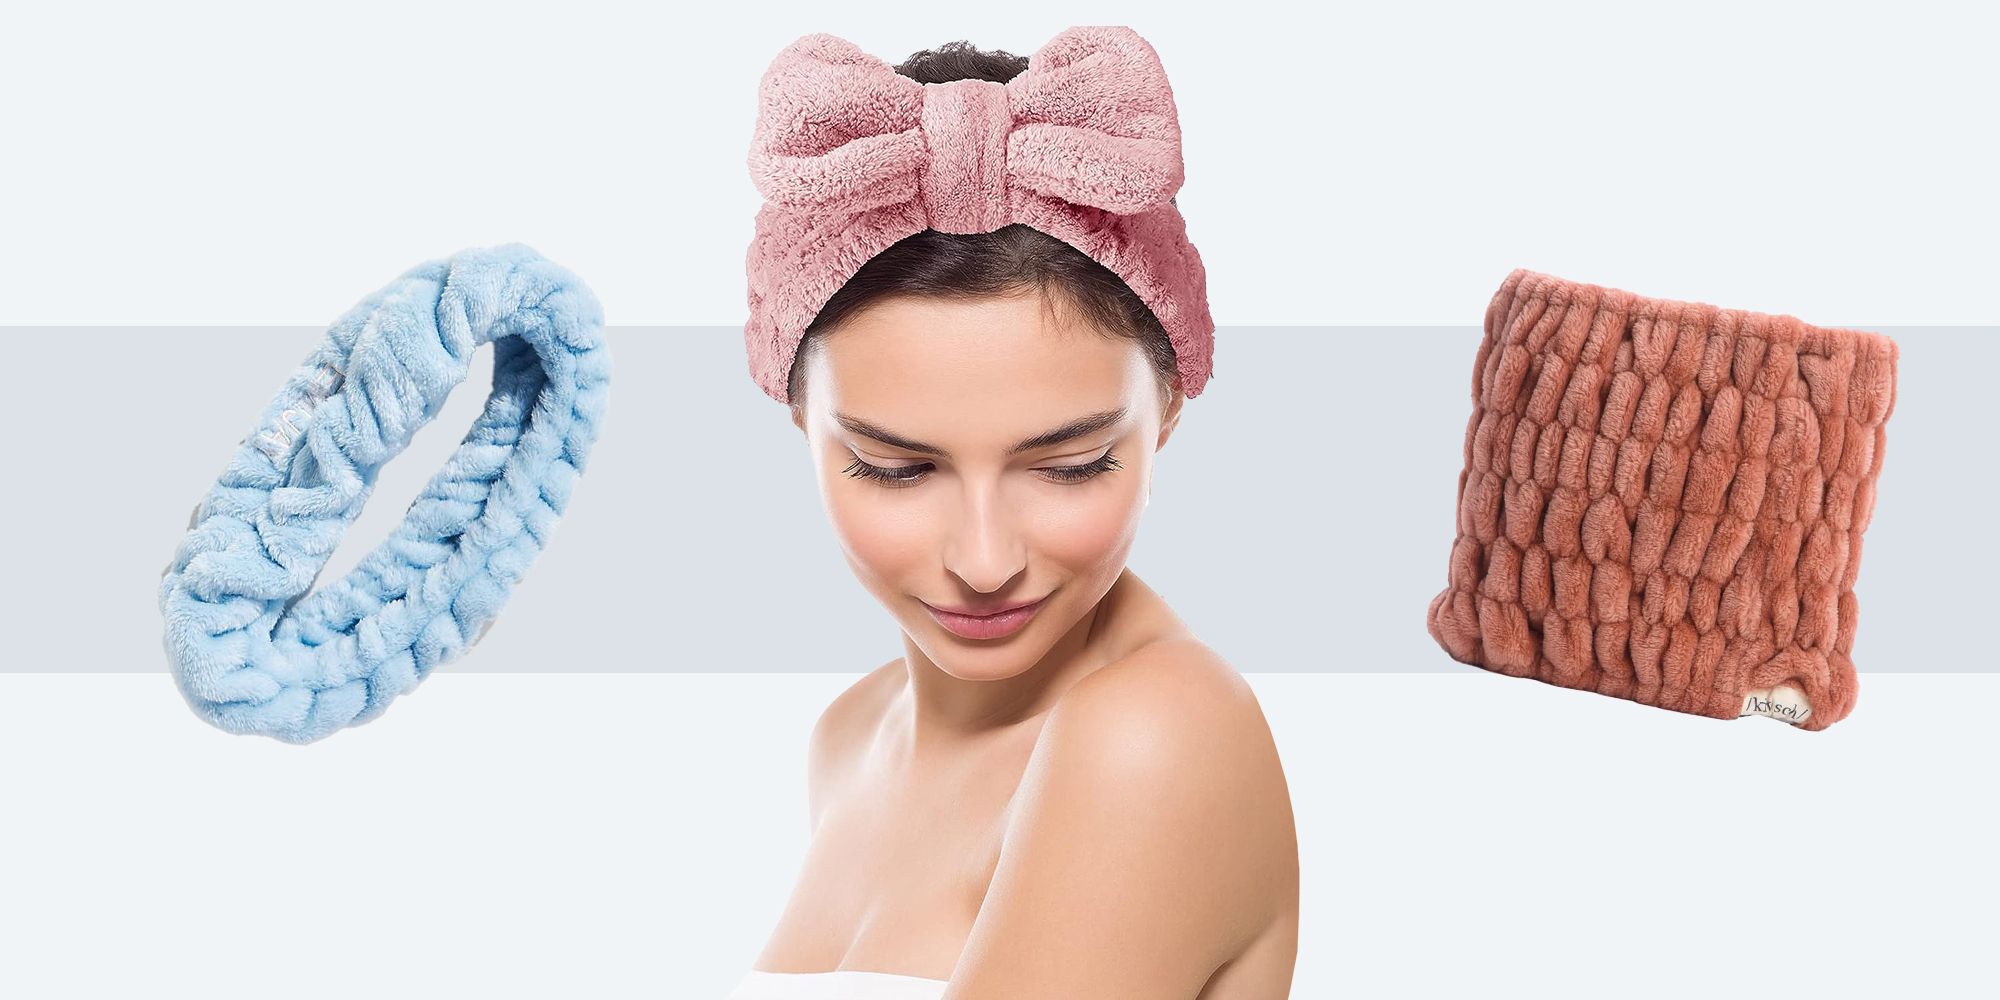 Makeup Headband, 6 Pcs Microfiber Soft Fuzzy Spa Headband for Washing Face,  Cosmetic Facial Shower Head Wraps, Cute Colorful Bow Hair Band for Women